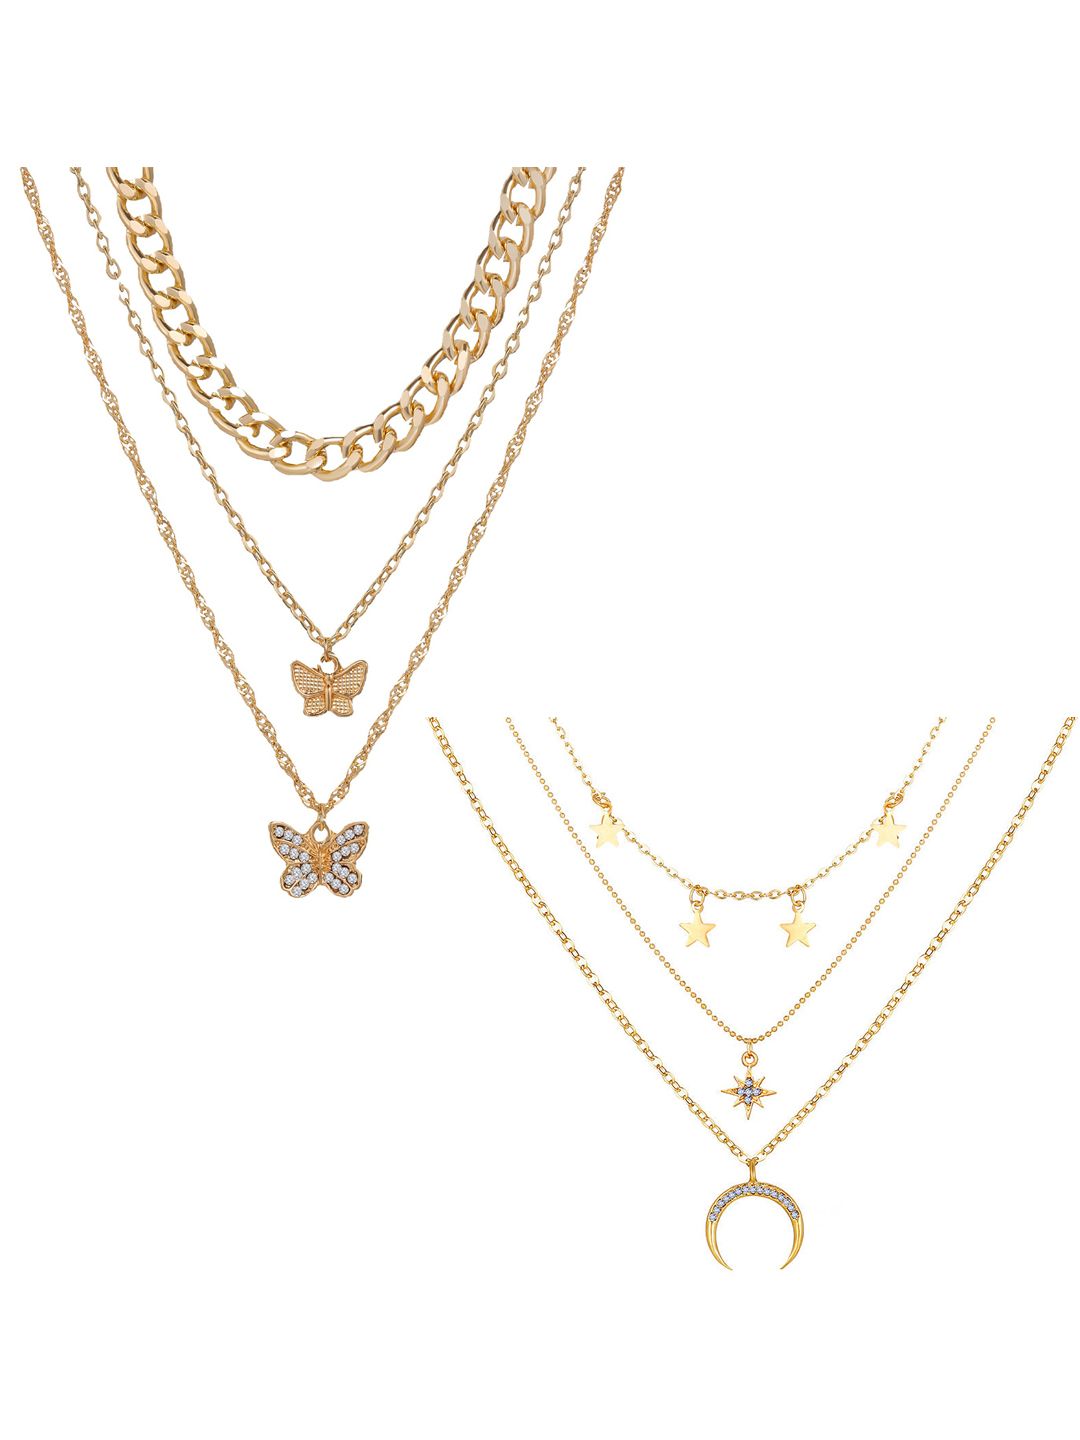 Vembley Set Of 2 Gold-Plated Layered Triple Layered Stars Moon & Butterfly Necklace Price in India